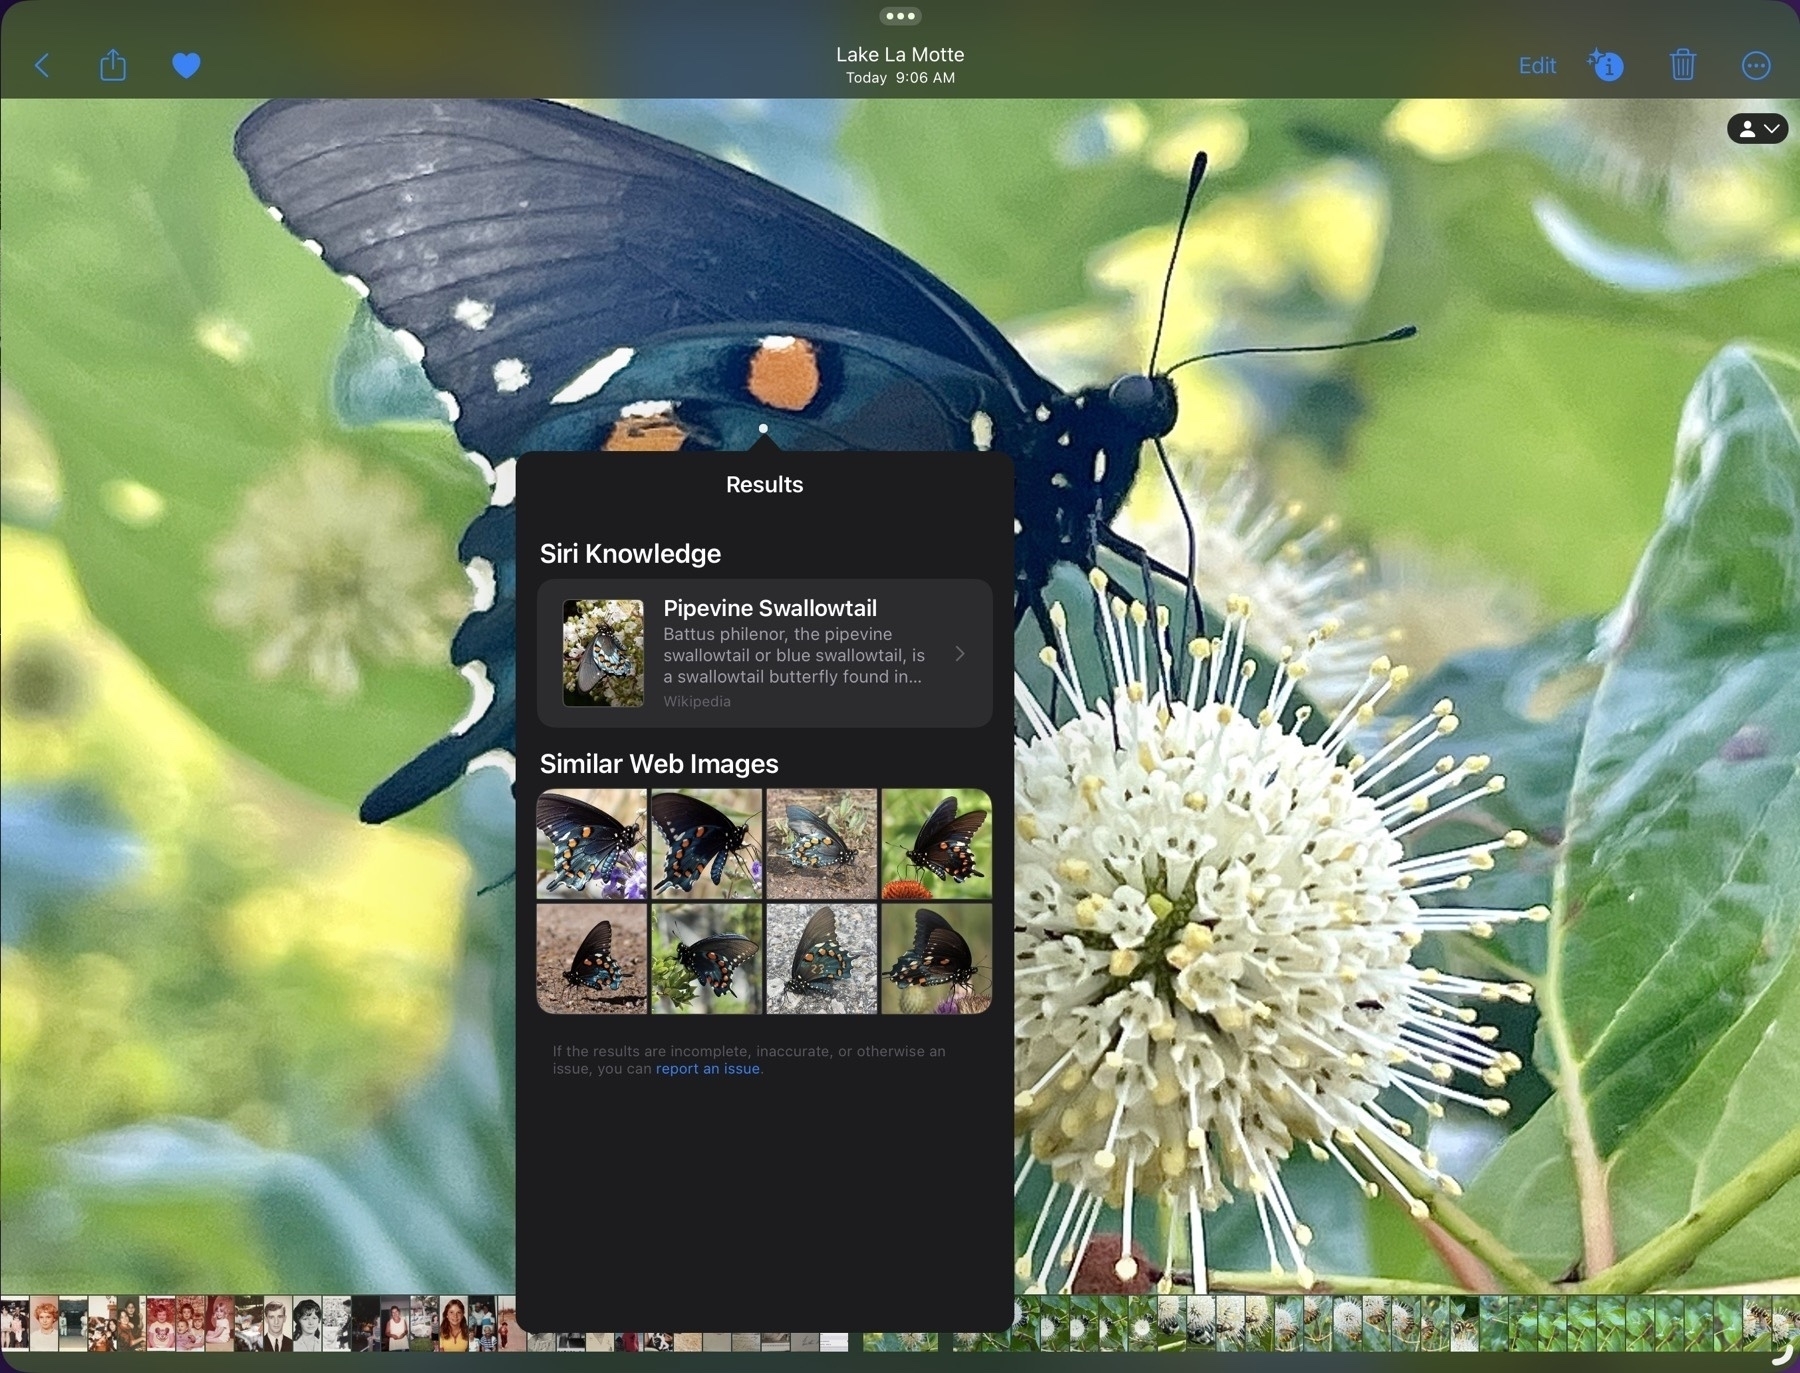 A screenshot of the Photos app on an iPad. The current photo is a black butterfly but the focus of the screenshot is the small 